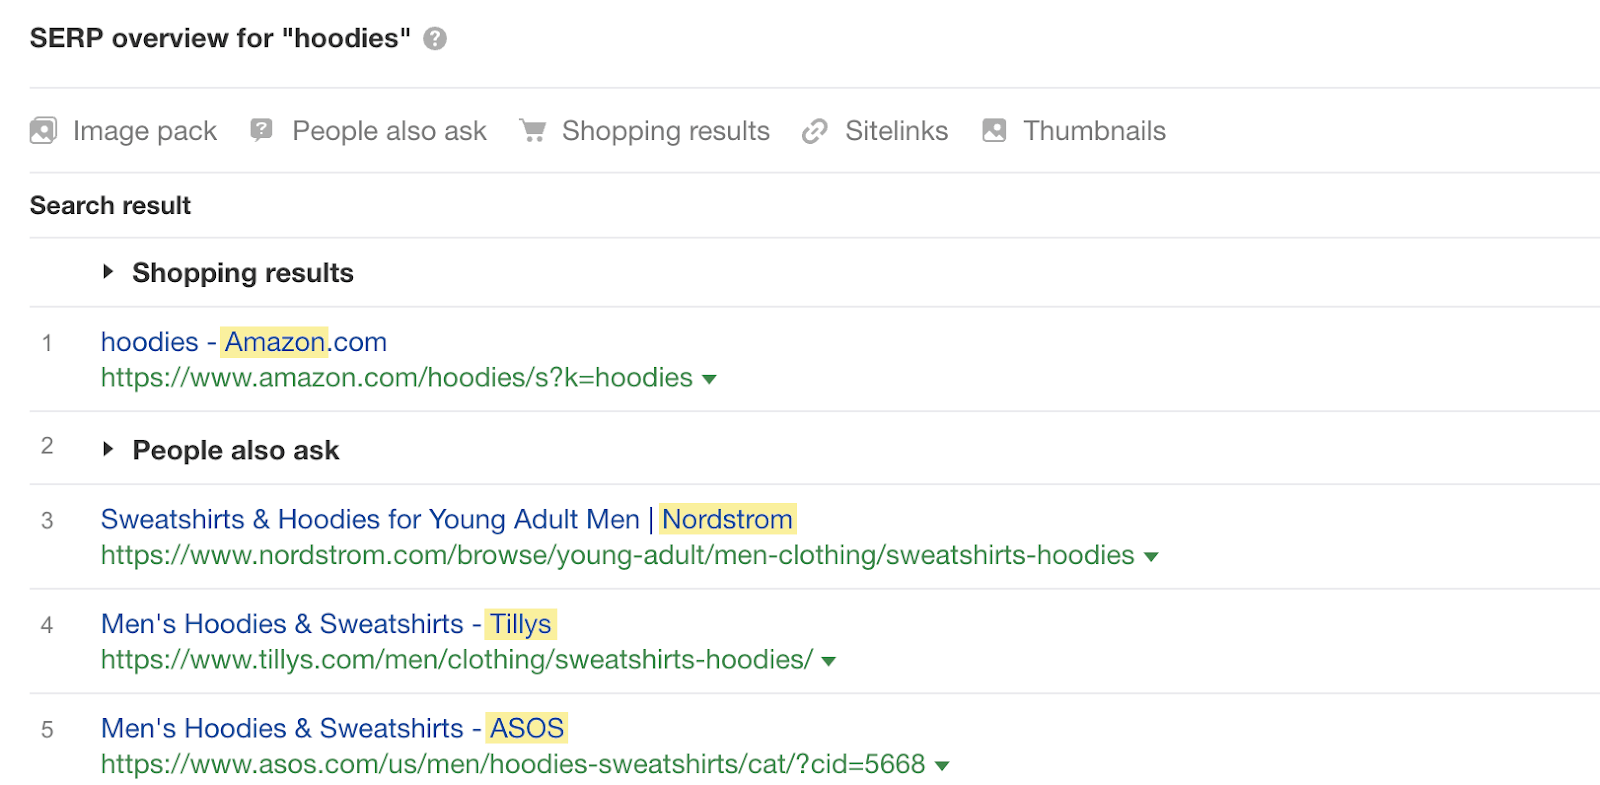 SERP overview for "hoodies" 